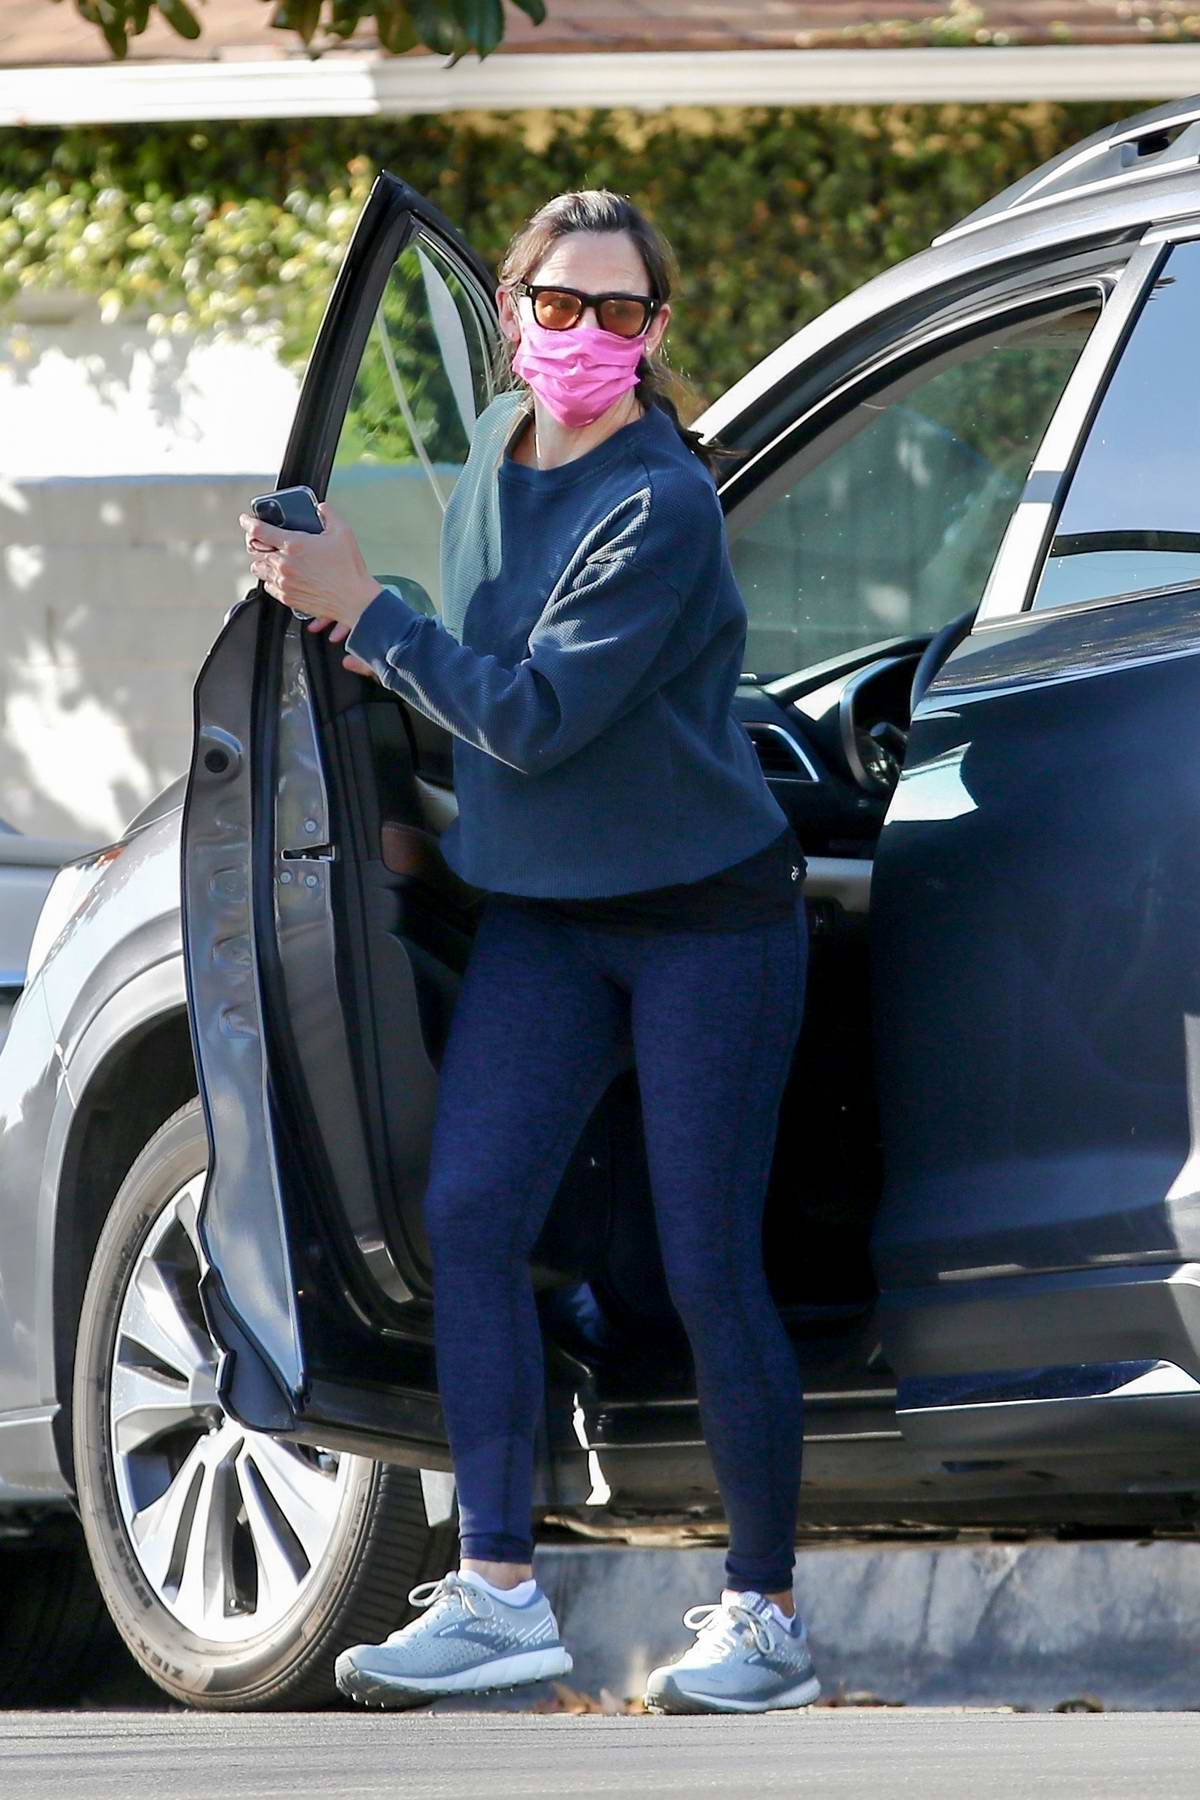 https://www.celebsfirst.com/wp-content/uploads/2021/01/jennifer-garner-shows-off-her-toned-legs-in-navy-blue-leggings-while-out-for-a-walk-with-a-friend-in-brentwood-california-110121_3.jpg